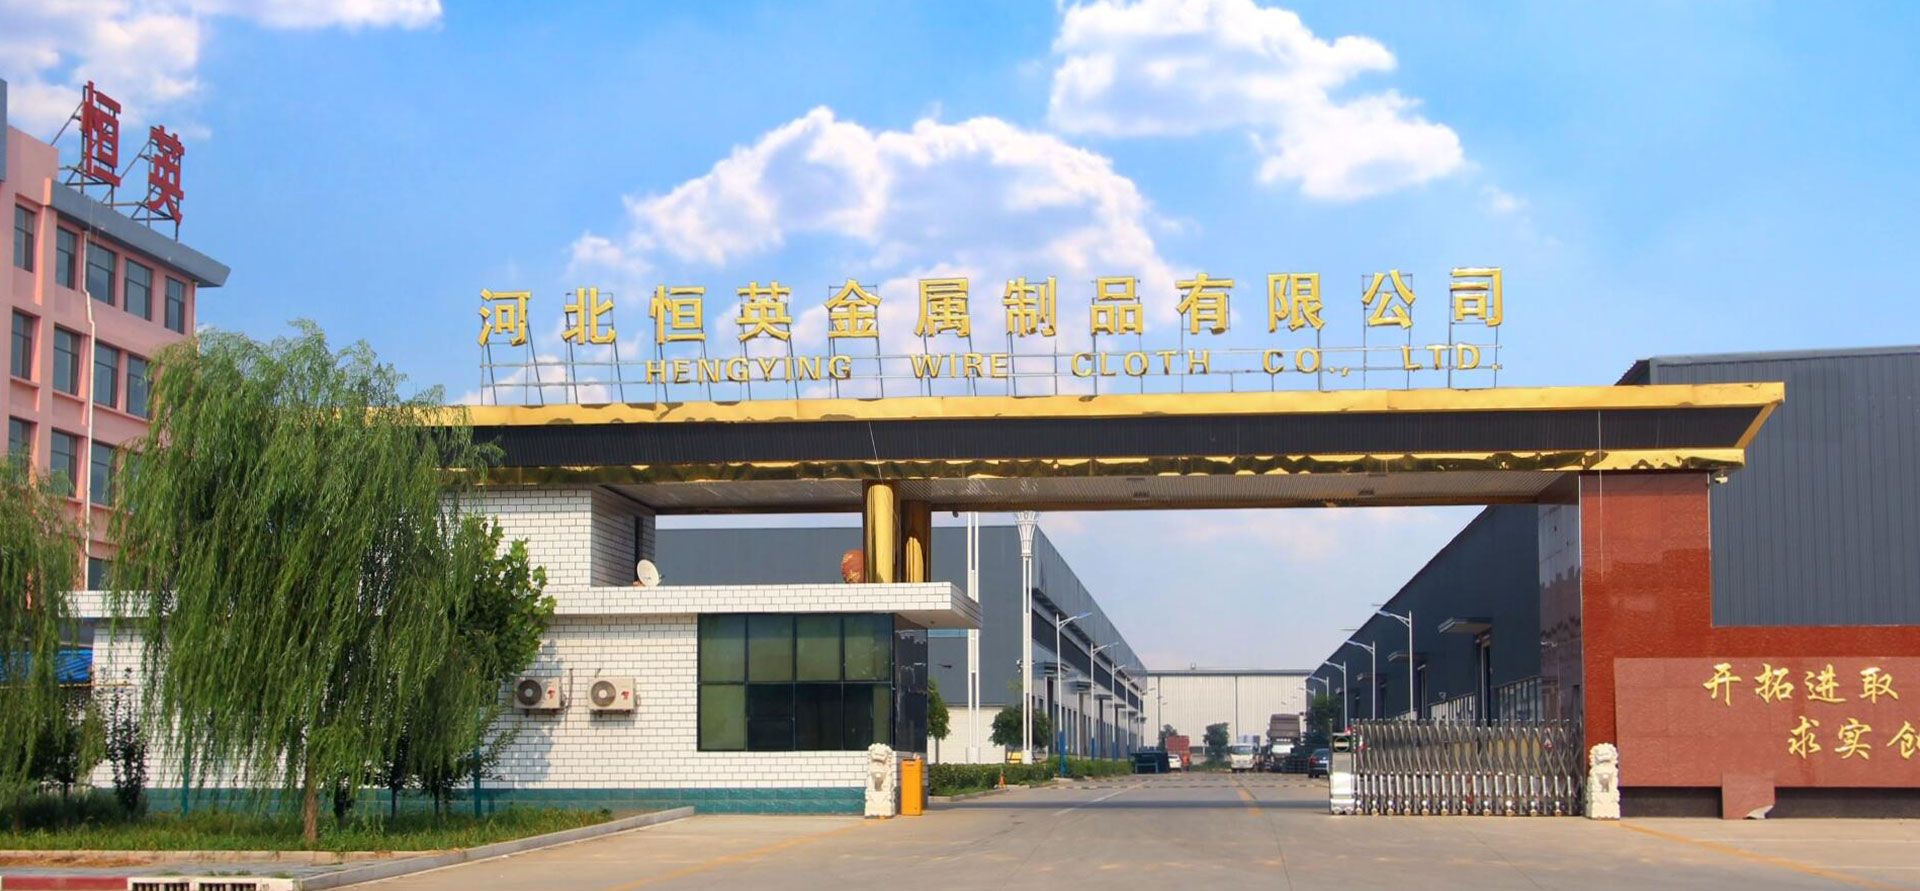 Hengying Wire Cloth Co.,Ltd.